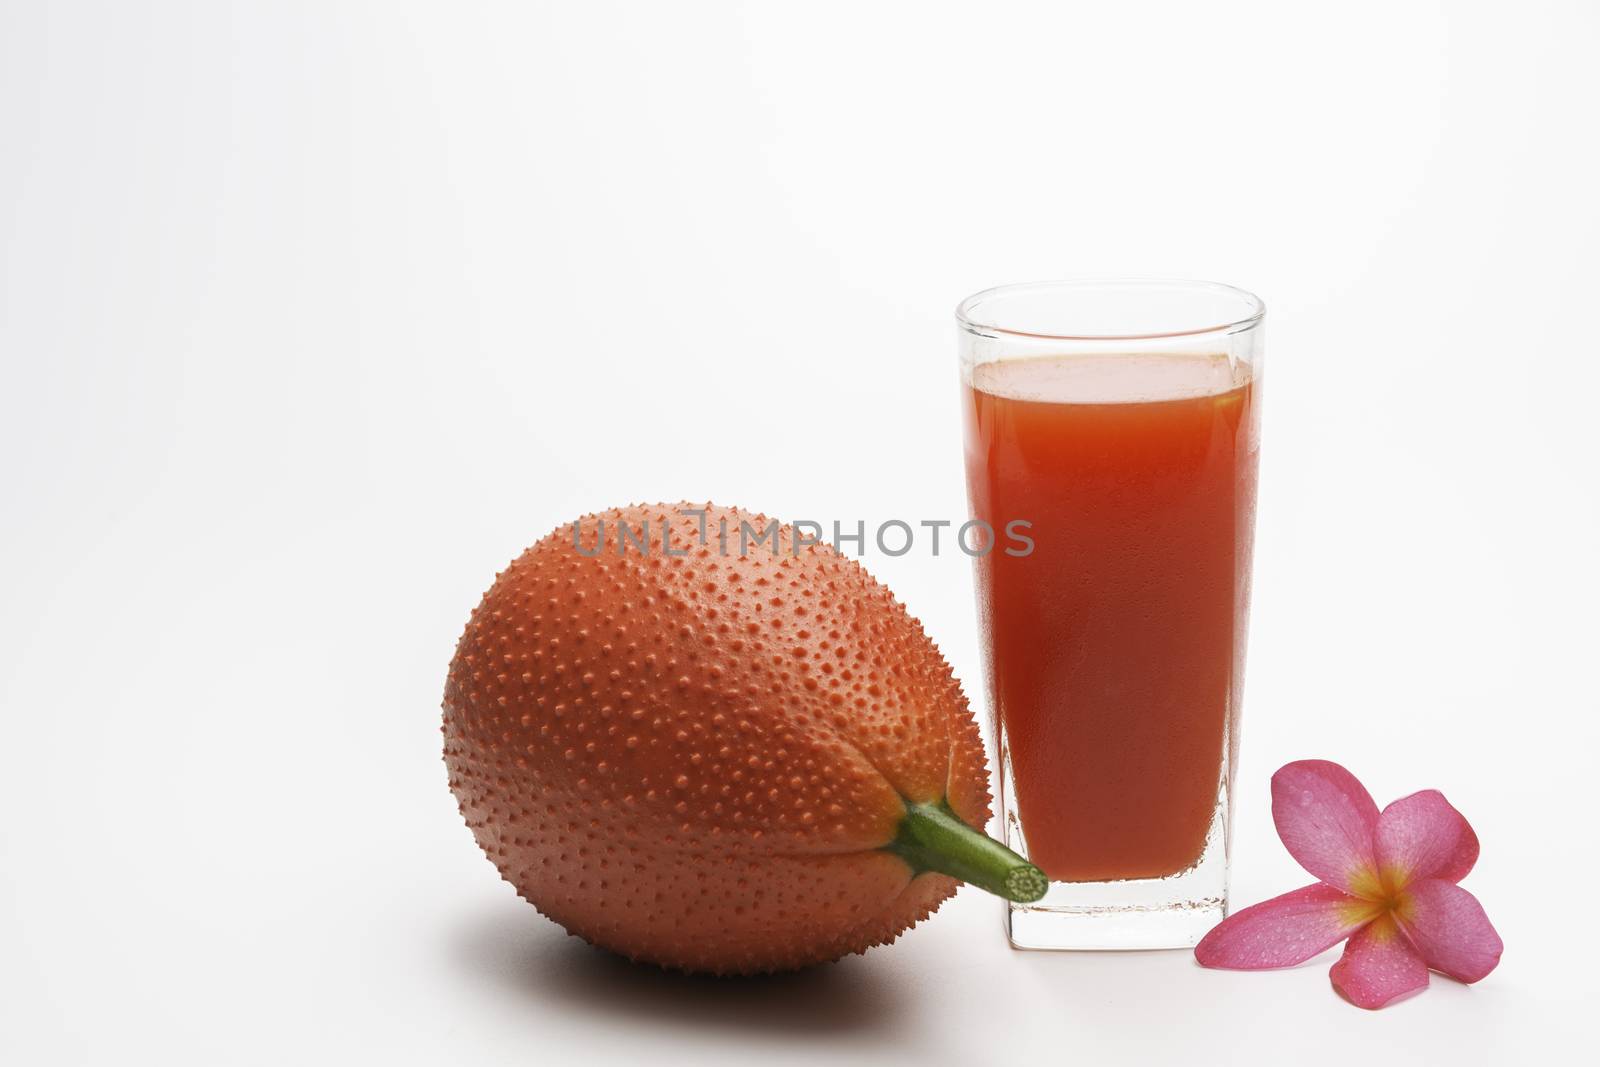 Baby Jackfruit, Gac fruit with baby jackfruit juice isolated on white background. Drink and healthy concept.